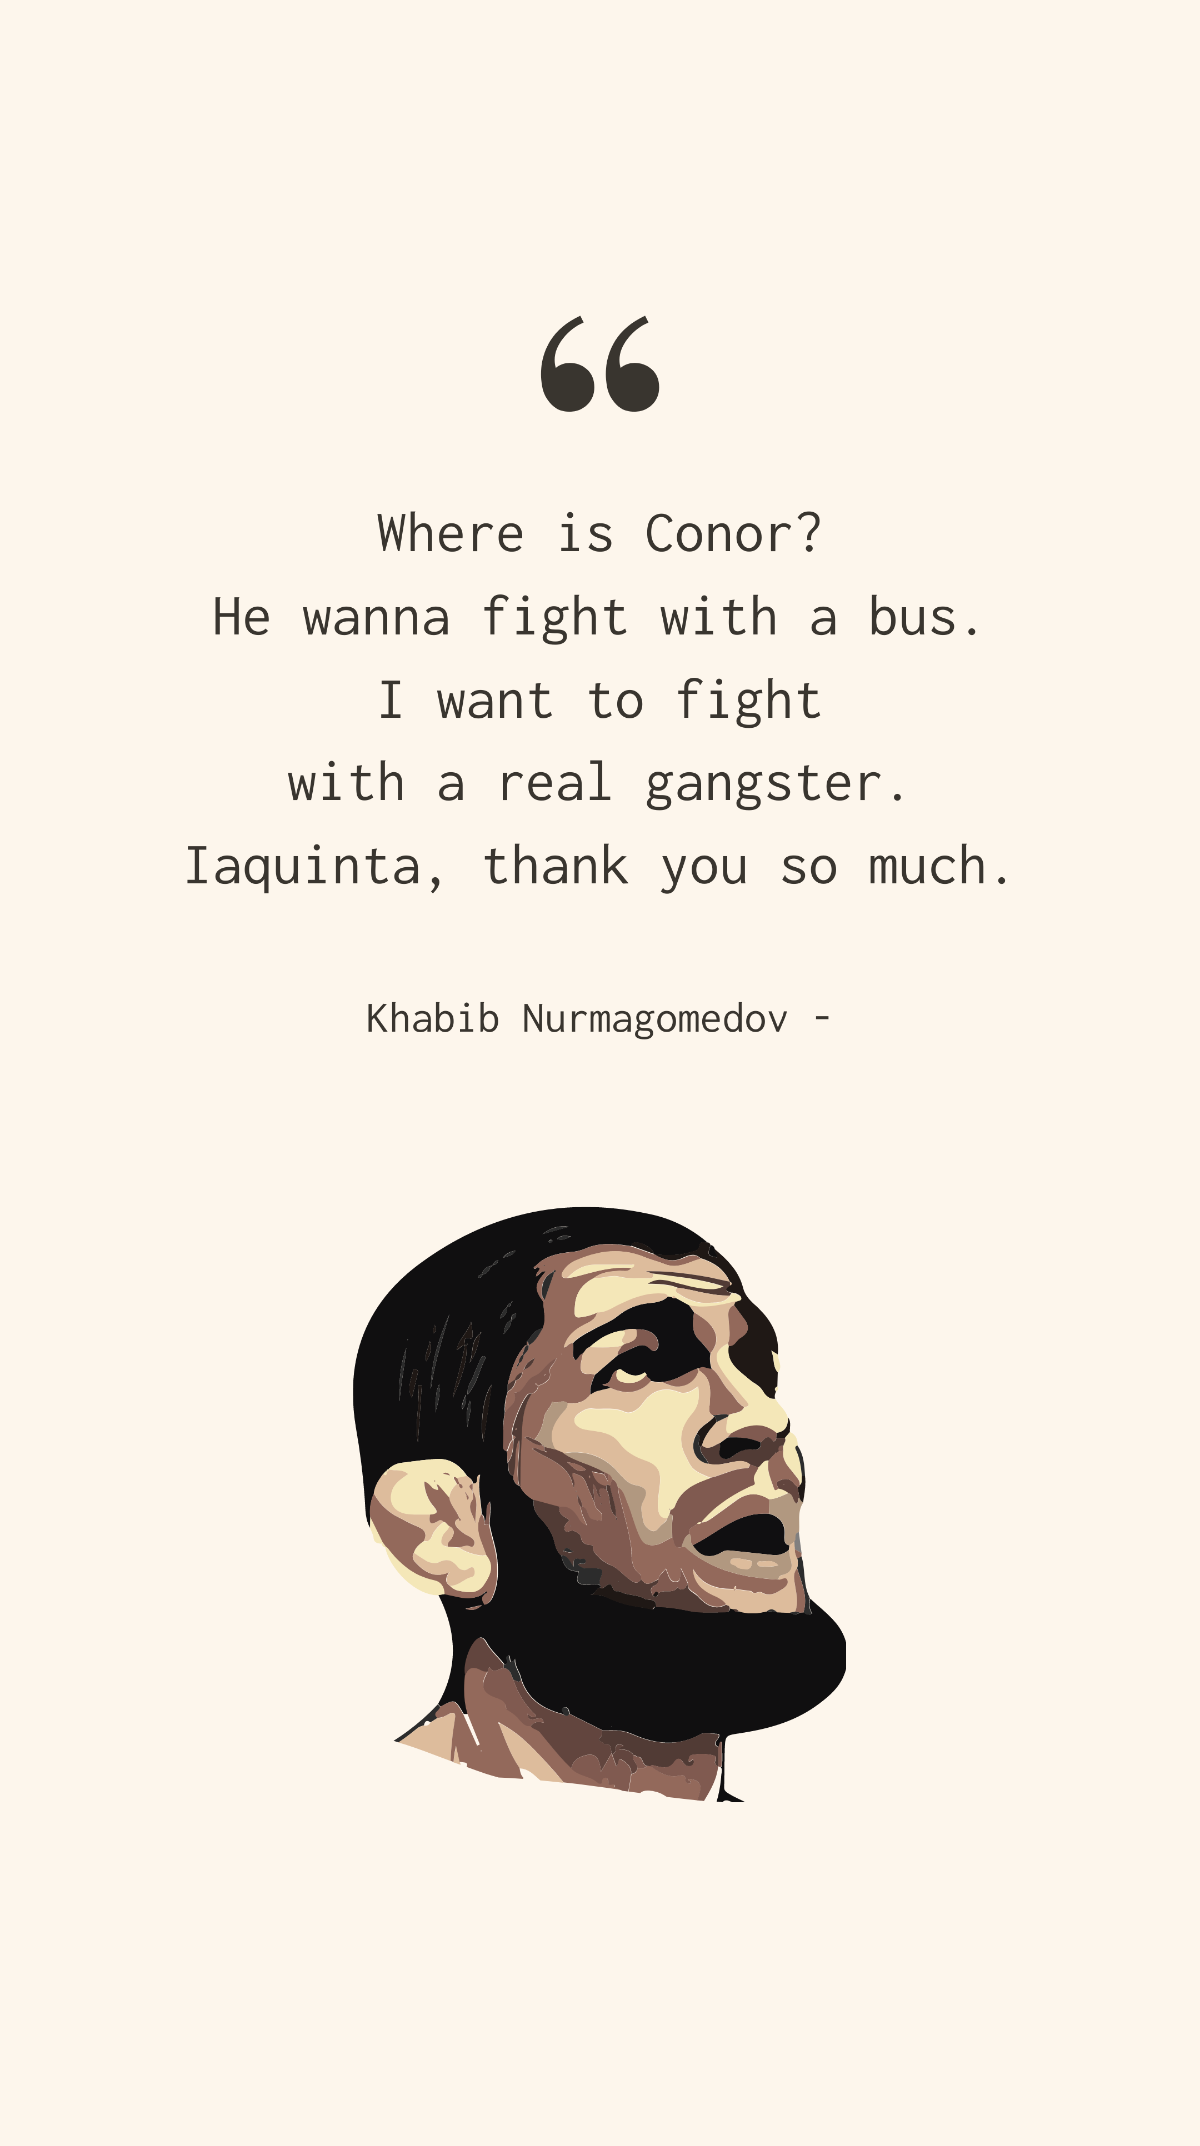 Khabib Nurmagomedov - Where is Conor? He wanna fight with a bus. I want to fight with a real gangster. Iaquinta, thank you so much.